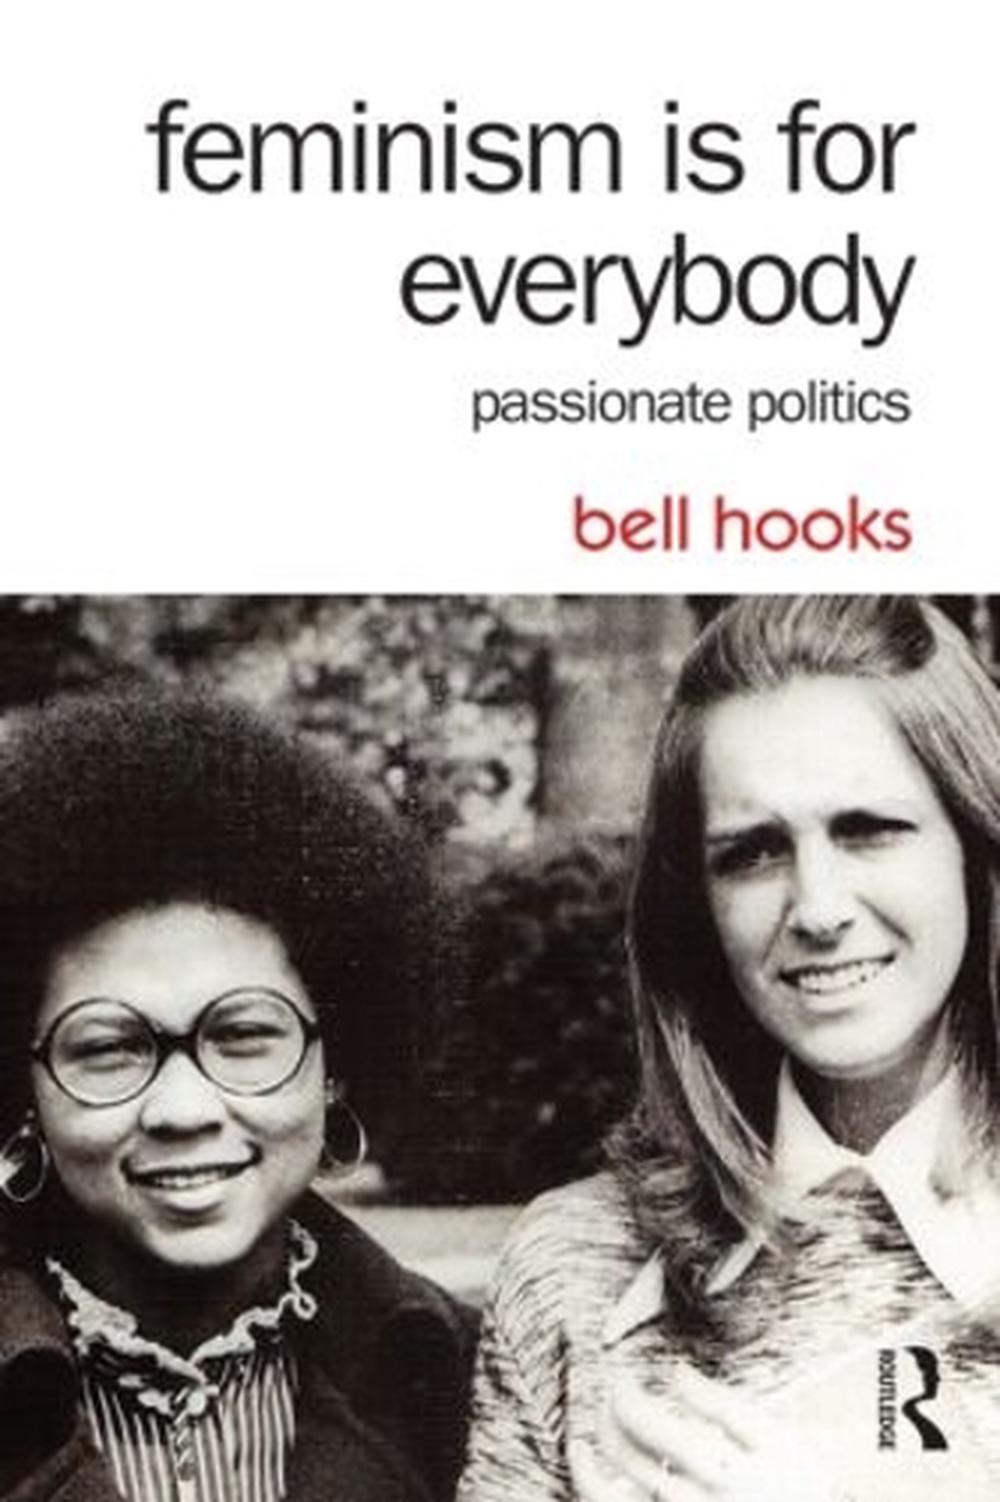 bell hooks feminism is for everybody sparknotes